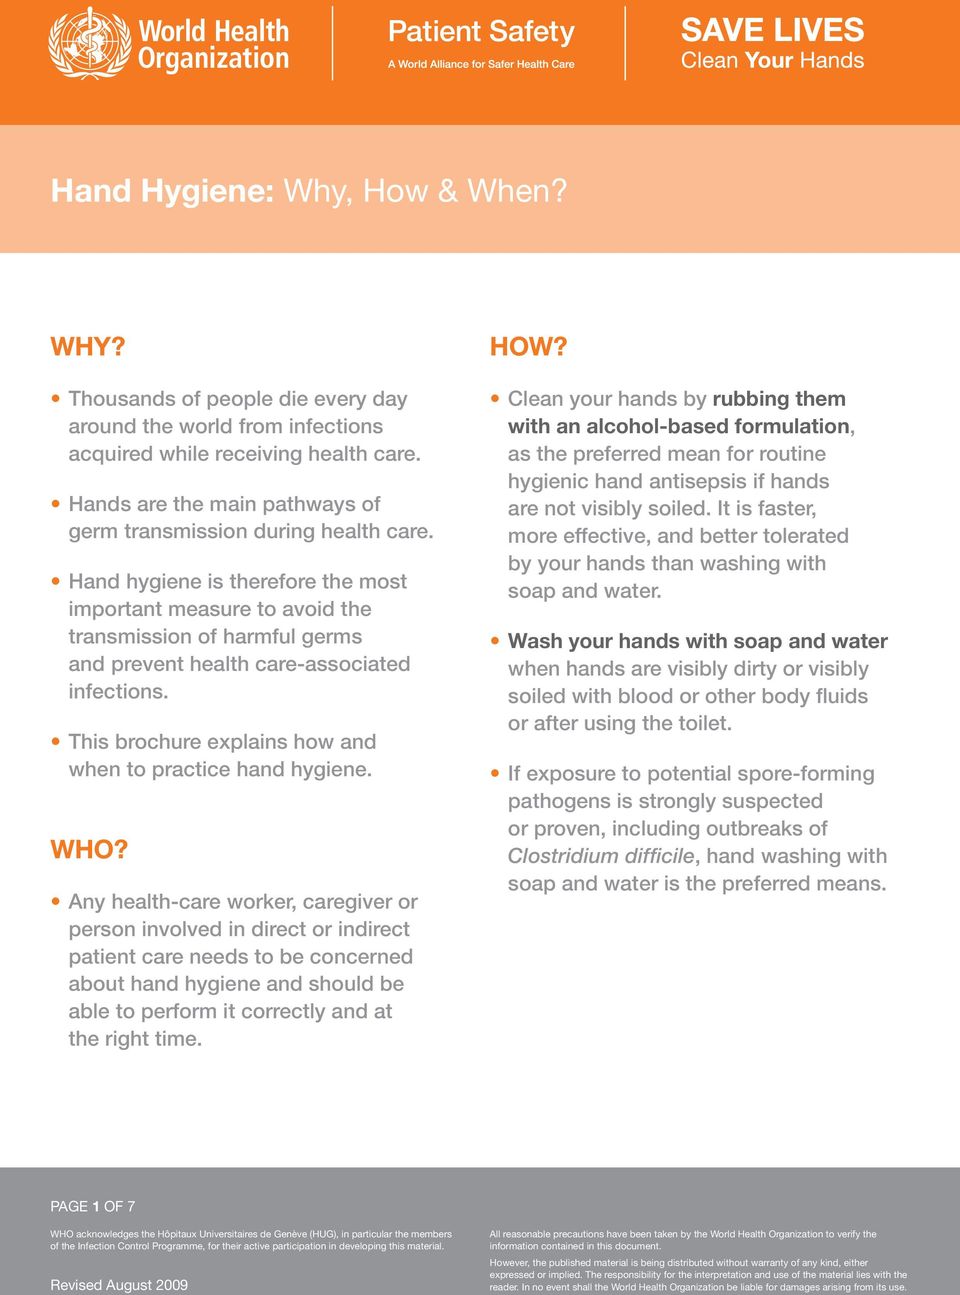 Hand hygiene is therefore the most important measure to avoid the transmission of harmful germs and prevent health care-associated infections.